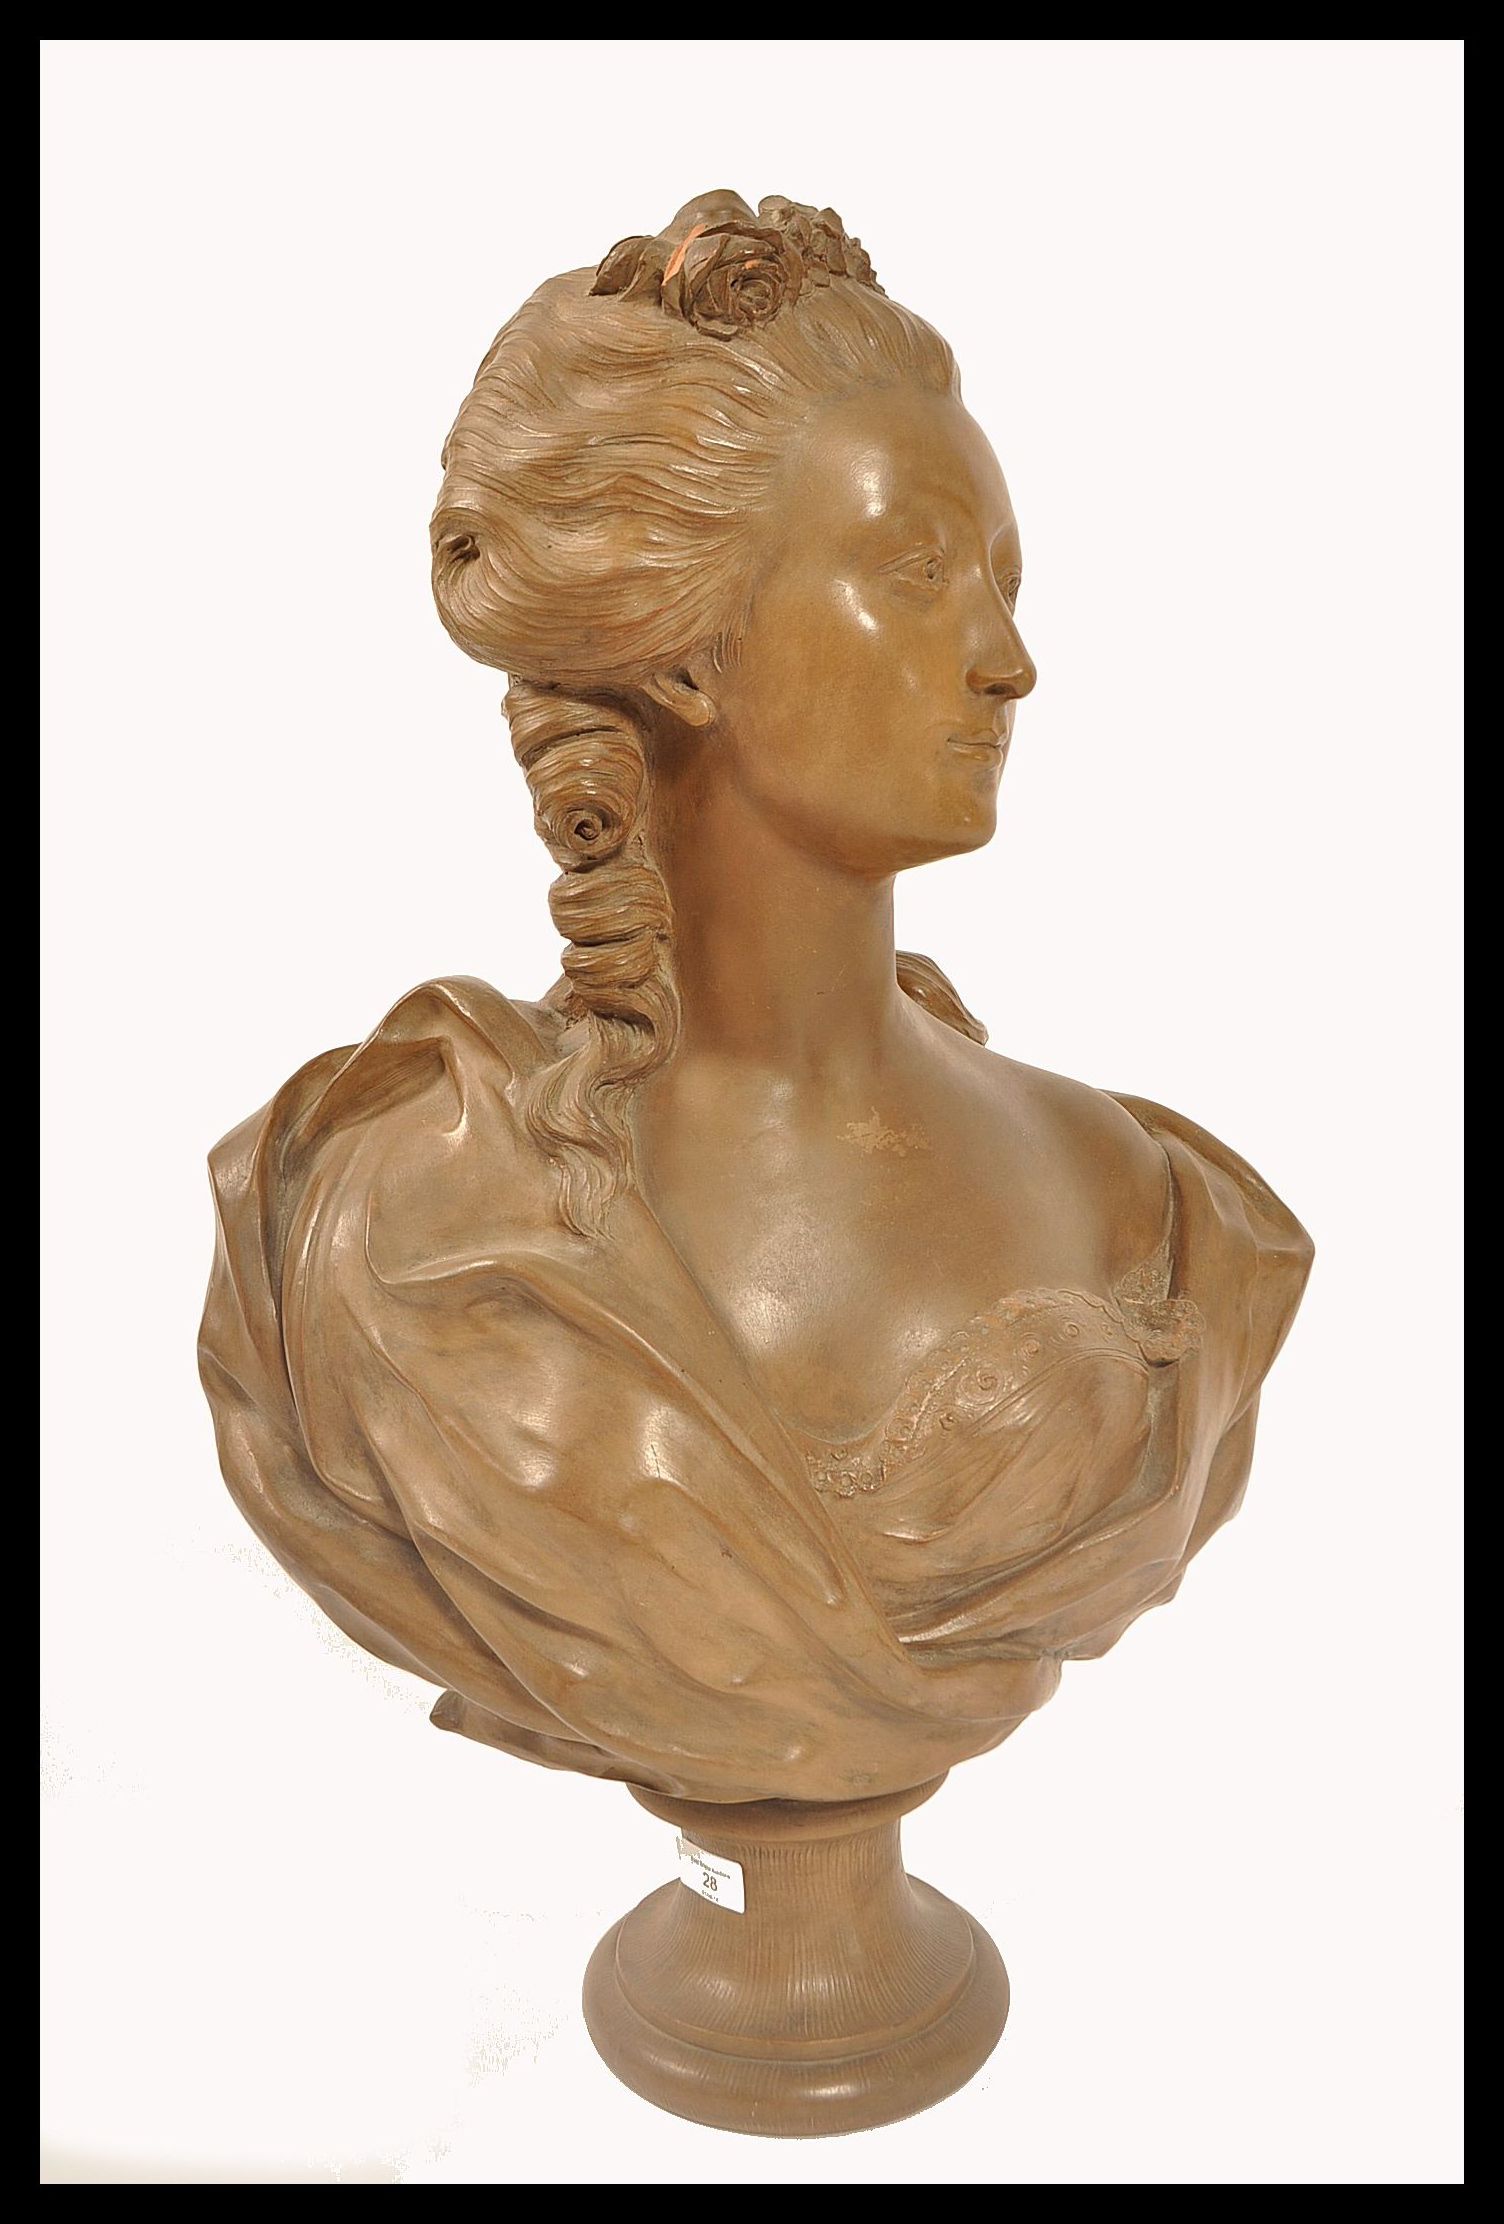 19TH CENTURY LARGE TERRACOTTA BUST AFTER AUGUSTIN PAJOU